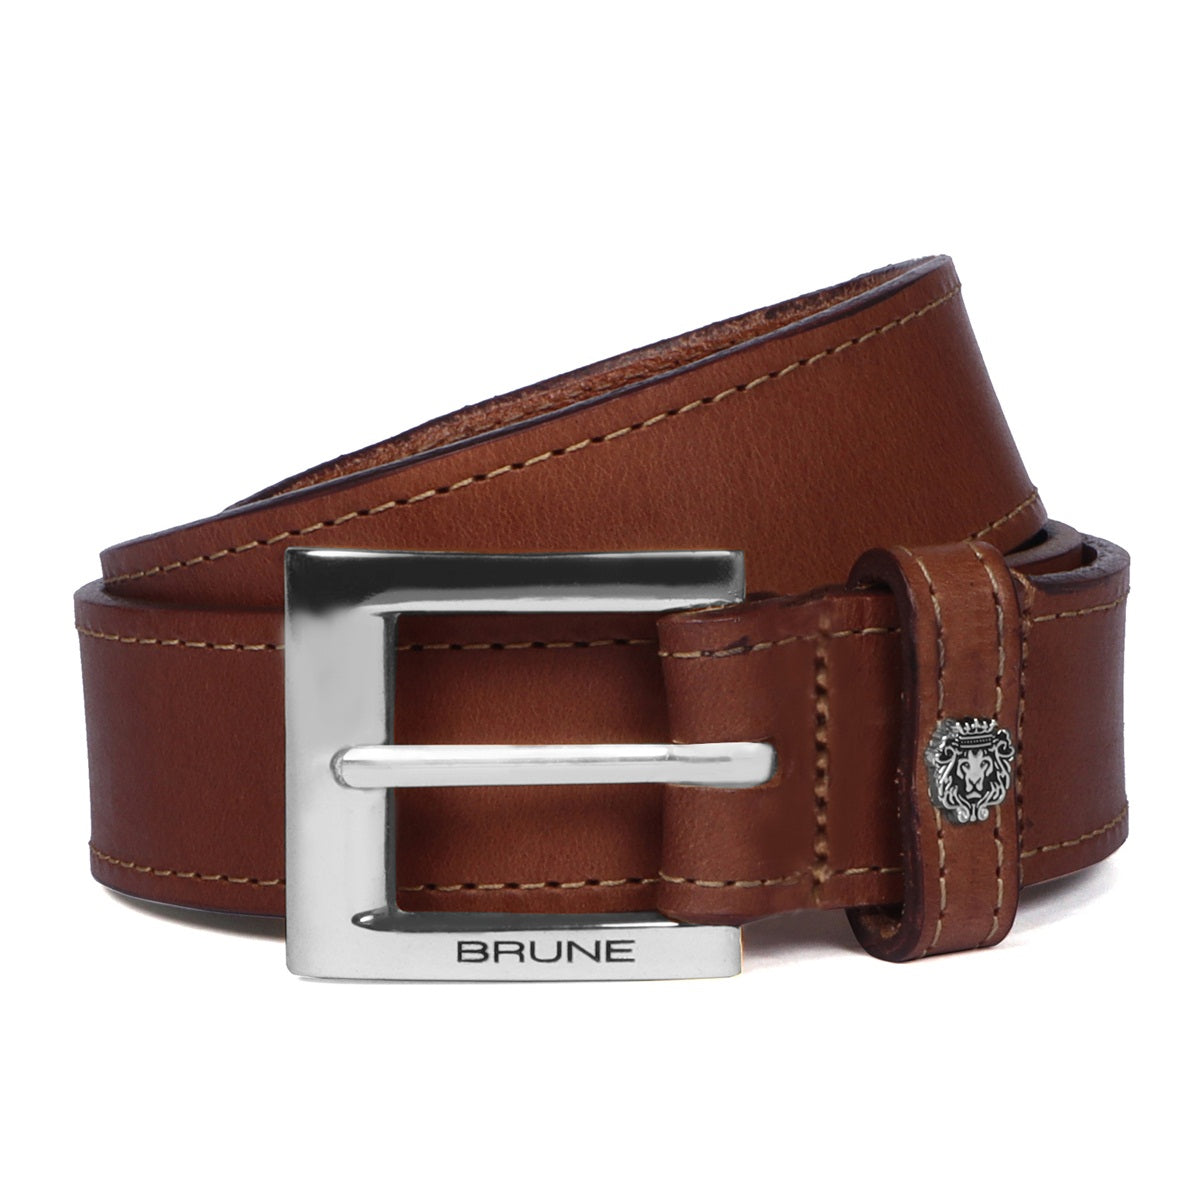 Thick Silver Square Buckle Belt Heavy Duty Tan Leather Double Stitch By Brune & Bareskin